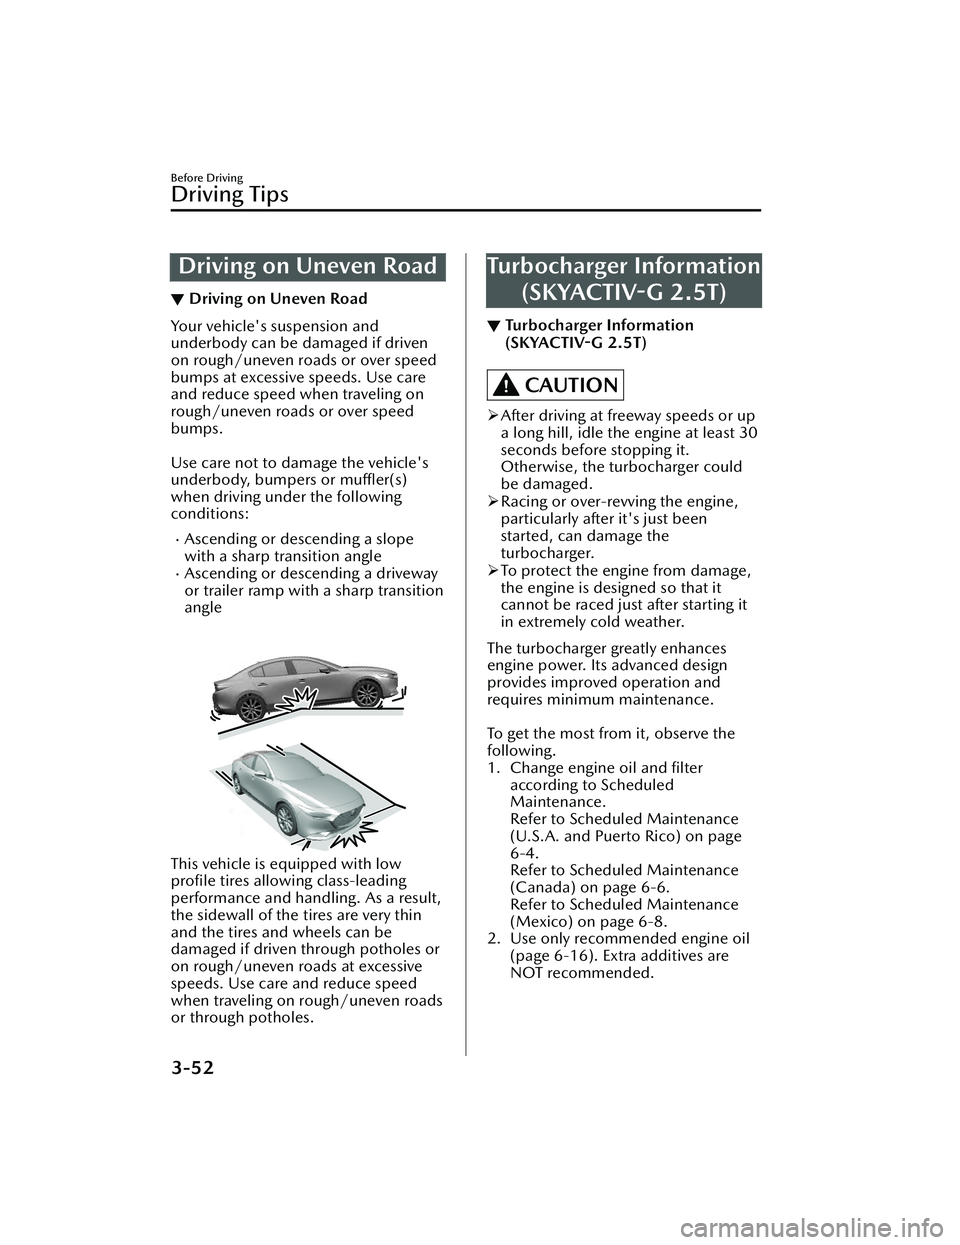 MAZDA MAZDA 2023  Owners Manual Driving on Uneven Road
▼Driving on Uneven Road
Your vehicle's suspension and
underbody can be damaged if driven
on rough/uneven roads or over speed
bumps at excessive speeds. Use care
and reduce